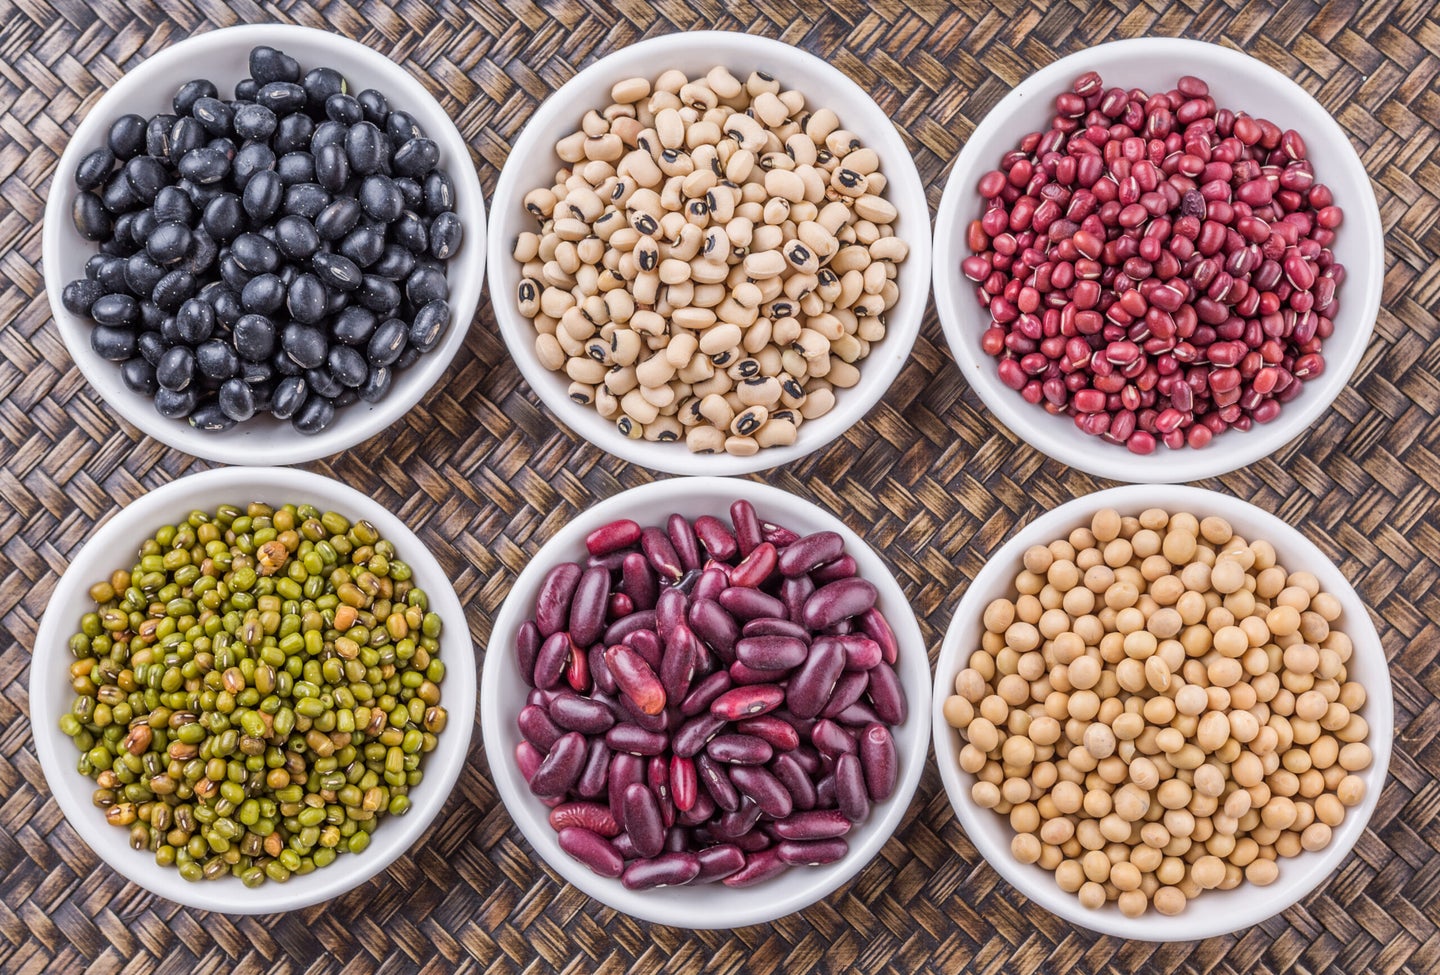 Beans are extremely high in fiber.